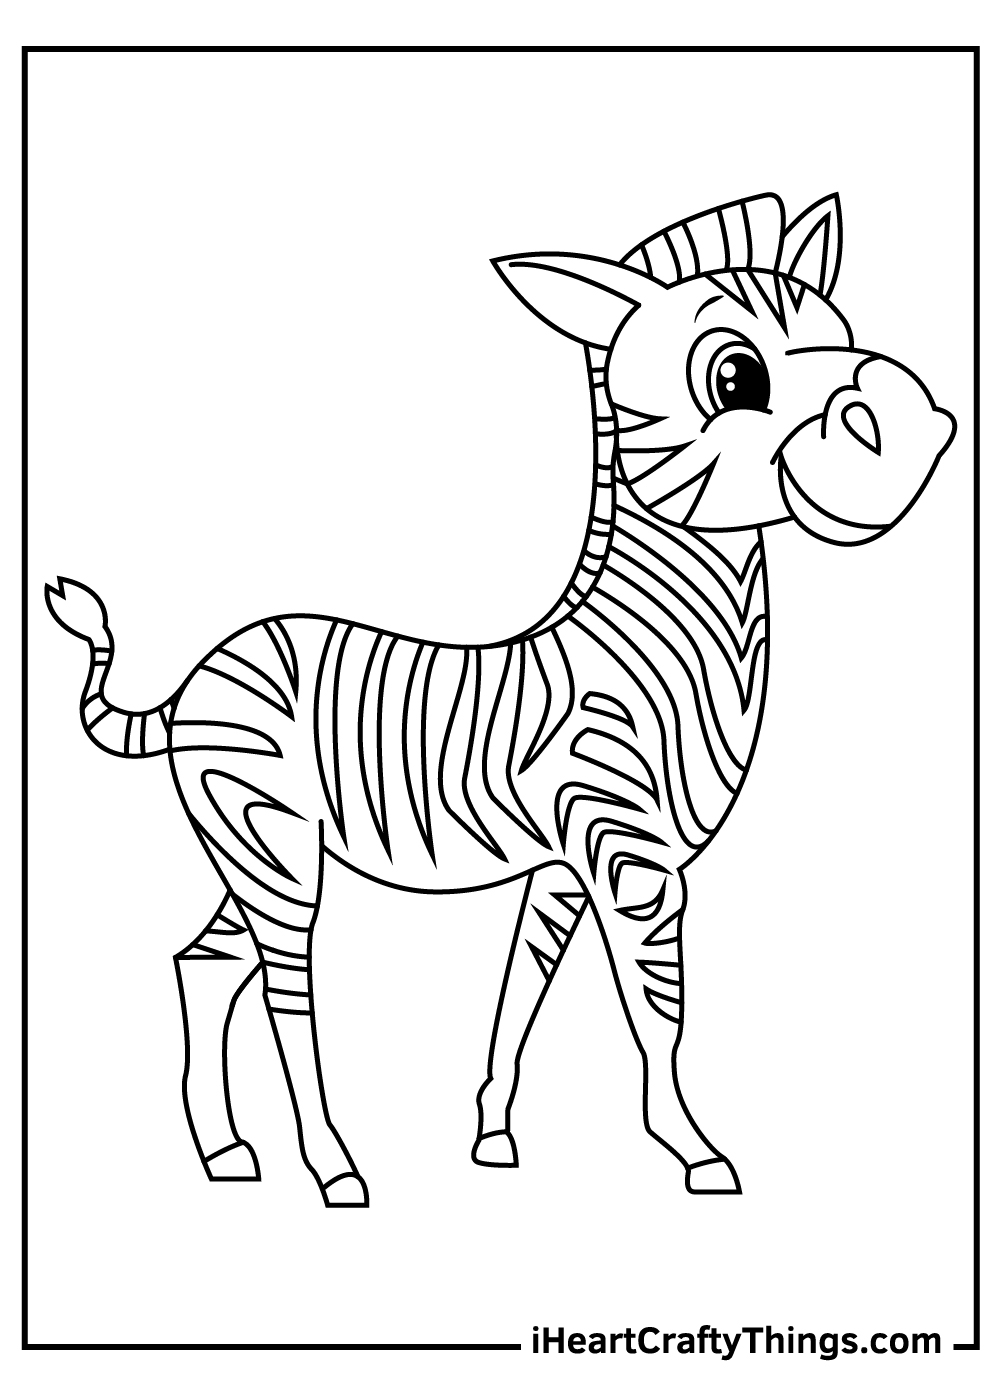 Zebra coloring pages free printables